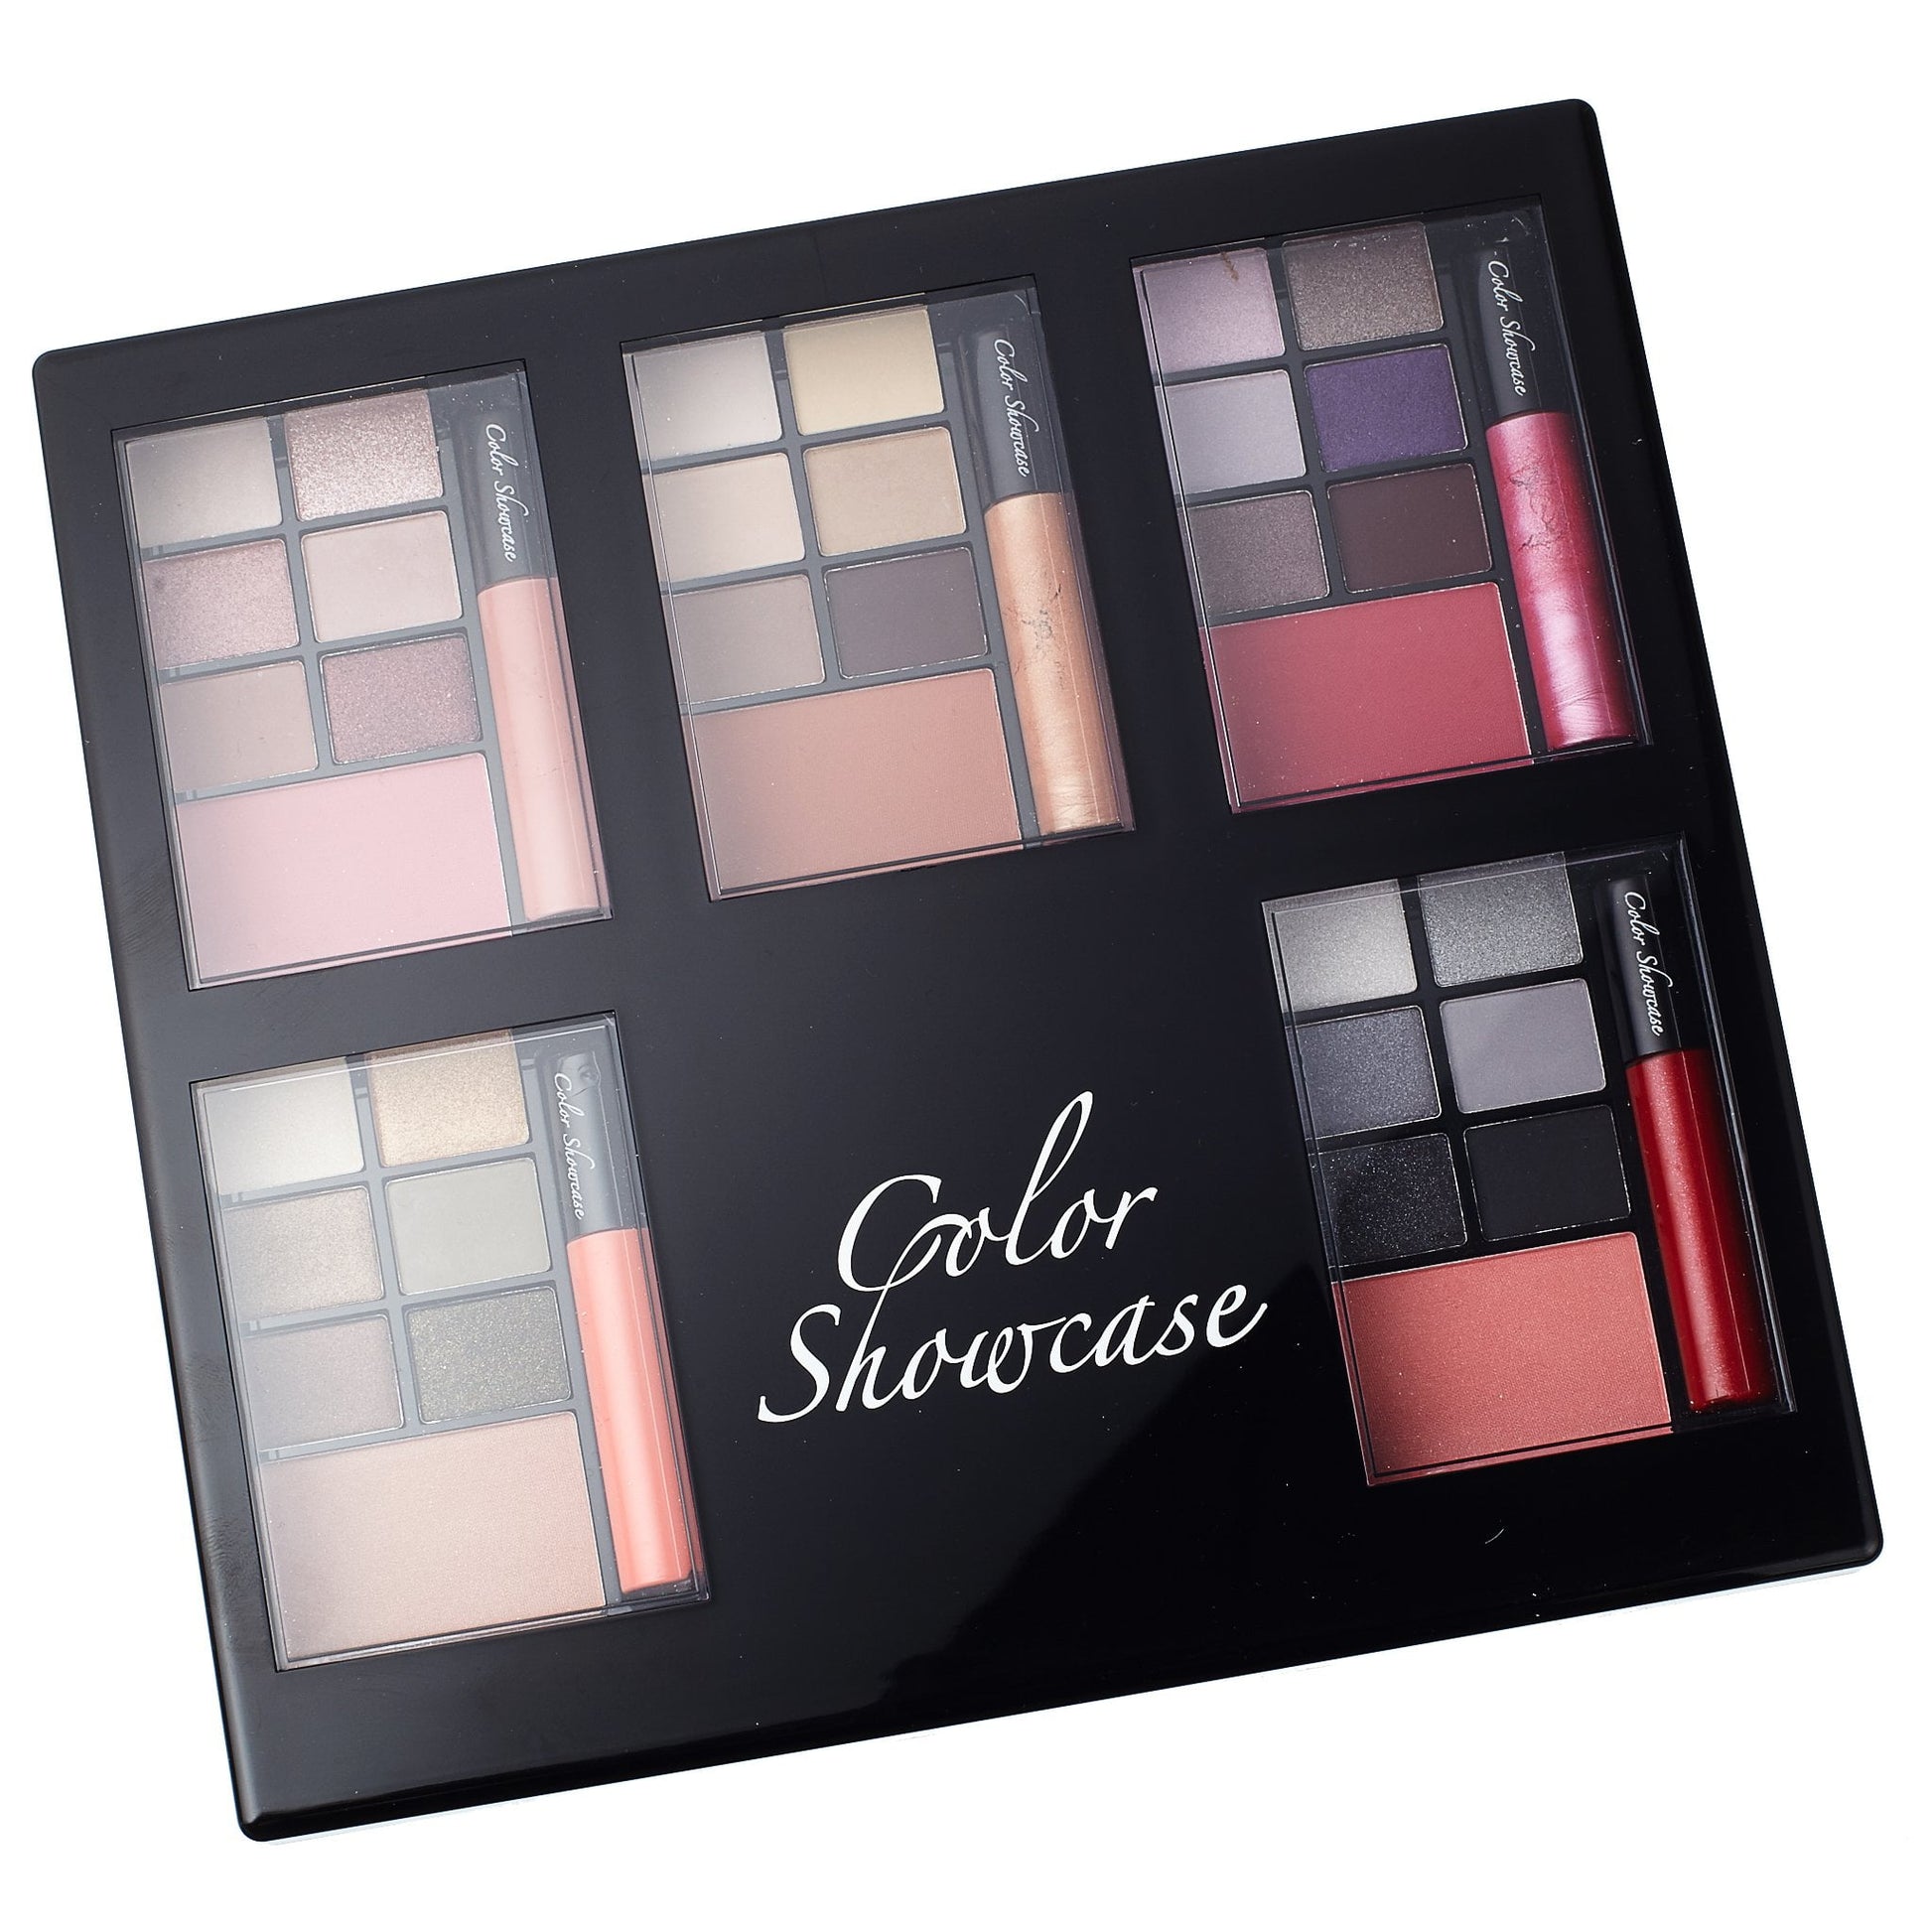 Color Show Case Travel Make Up Compact Set Pallet for Women, Product image 1